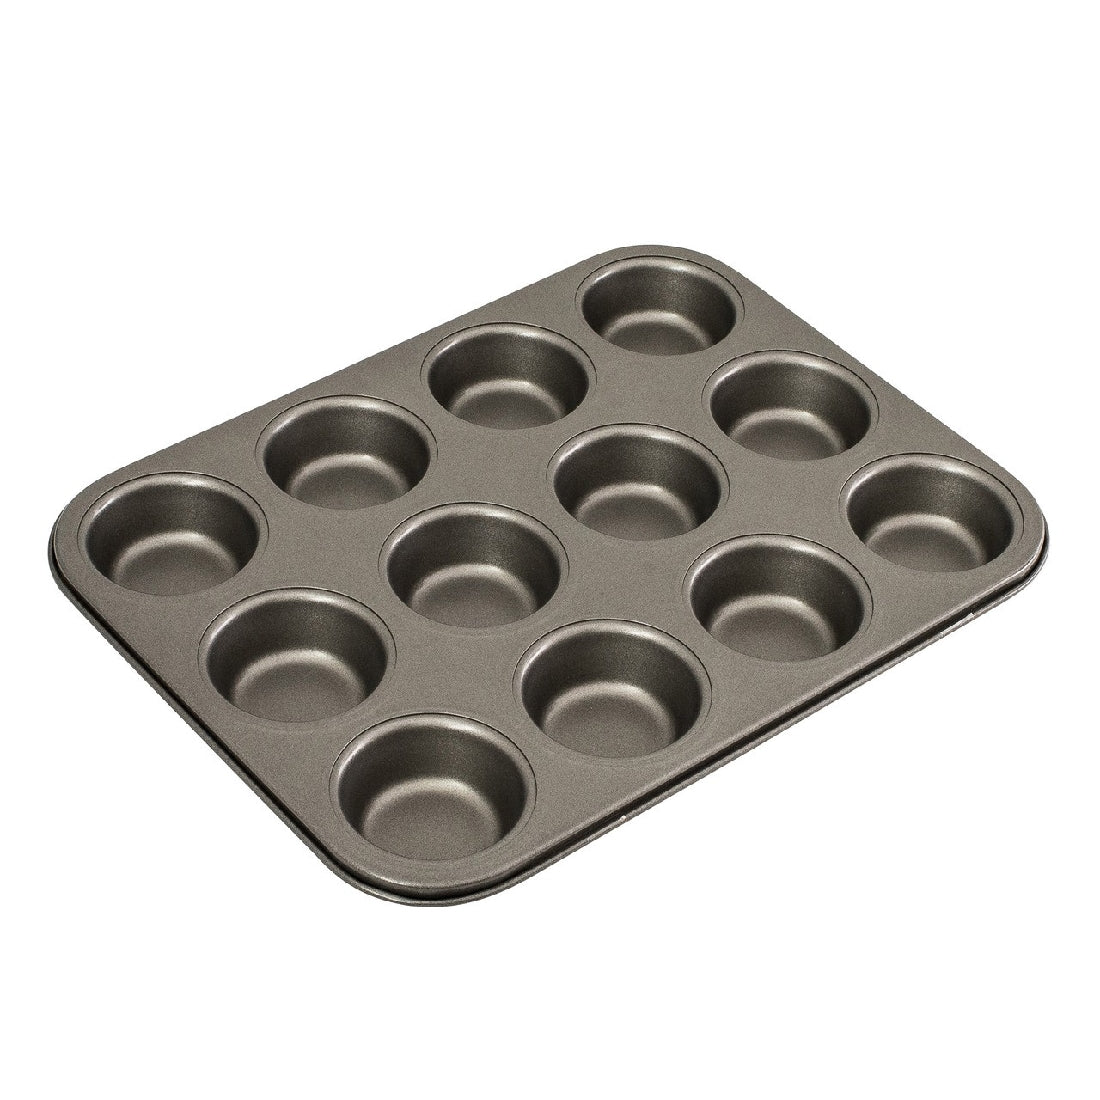 Bakemaster 12 Cup Muffin Pan 35x27cm